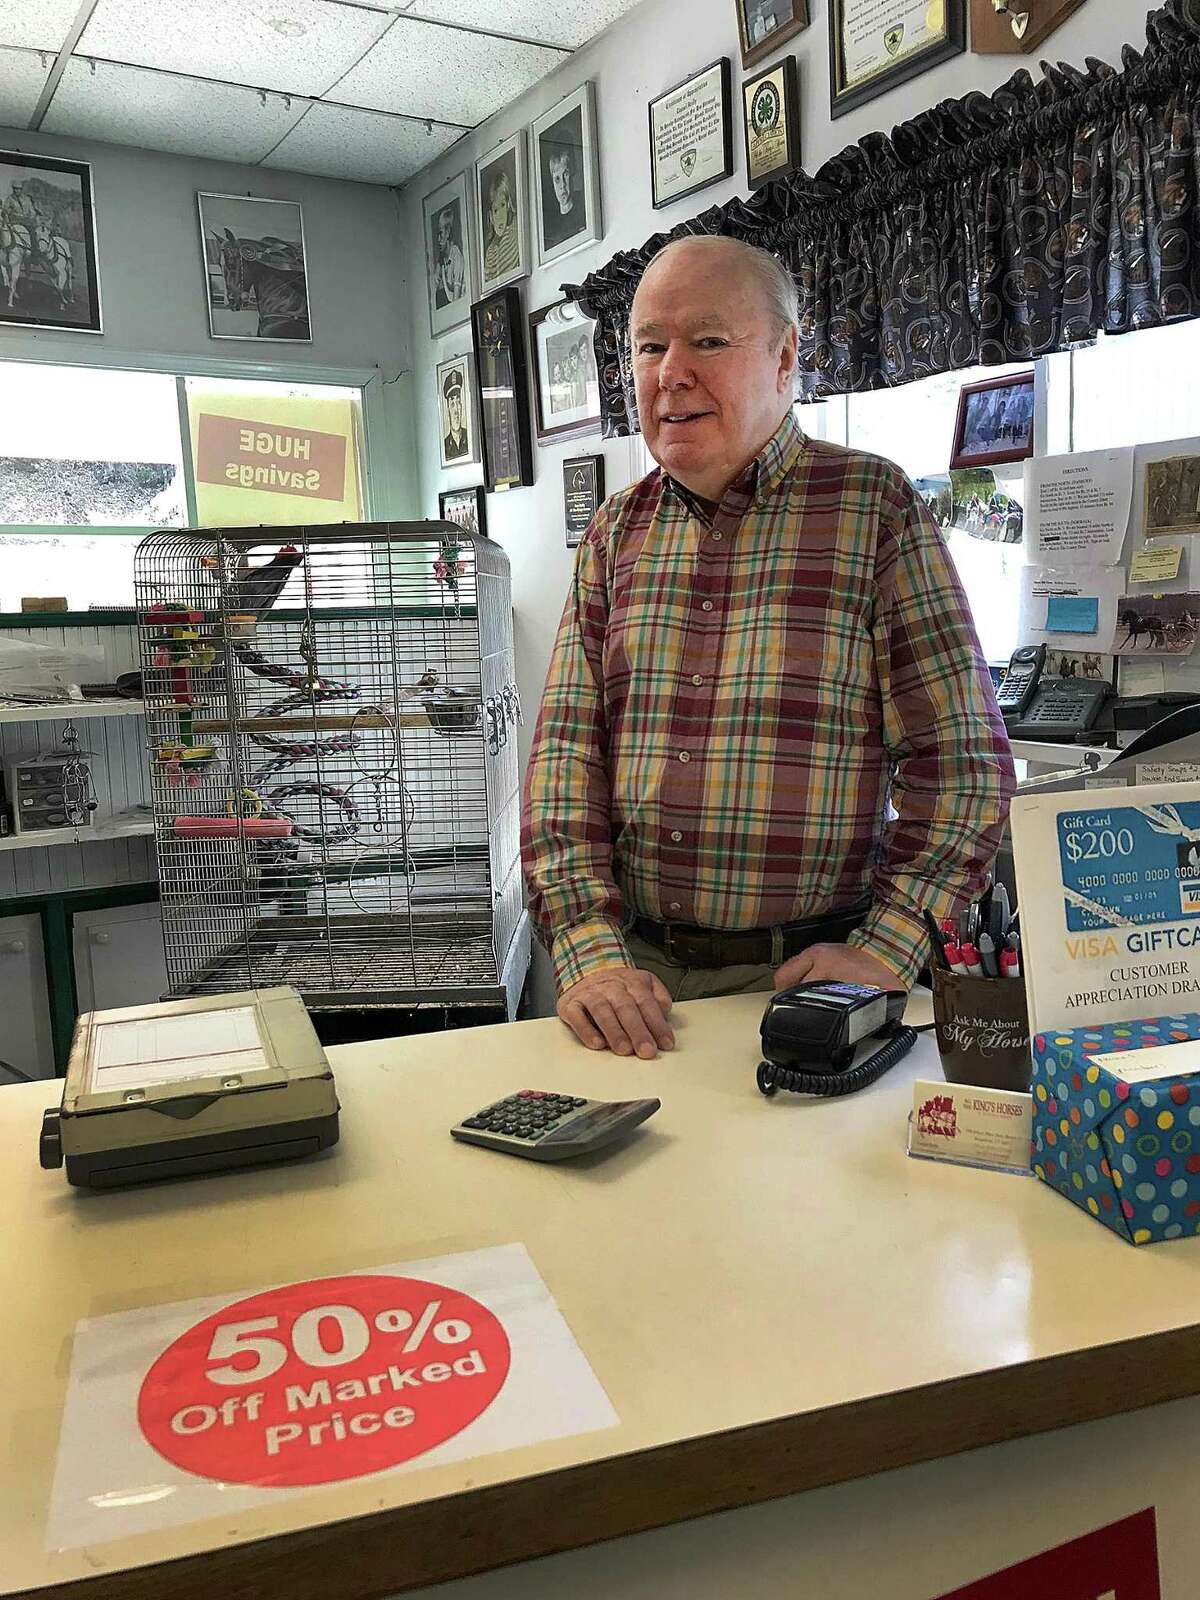 Dan Reilly stands behind the counter at All The Kings's Horses on Ethan Allen Highway in Ridgefield, Conn., on Tuesday, May 8, 2018. Reilly is closing the shop for retirement after 44 years in business.